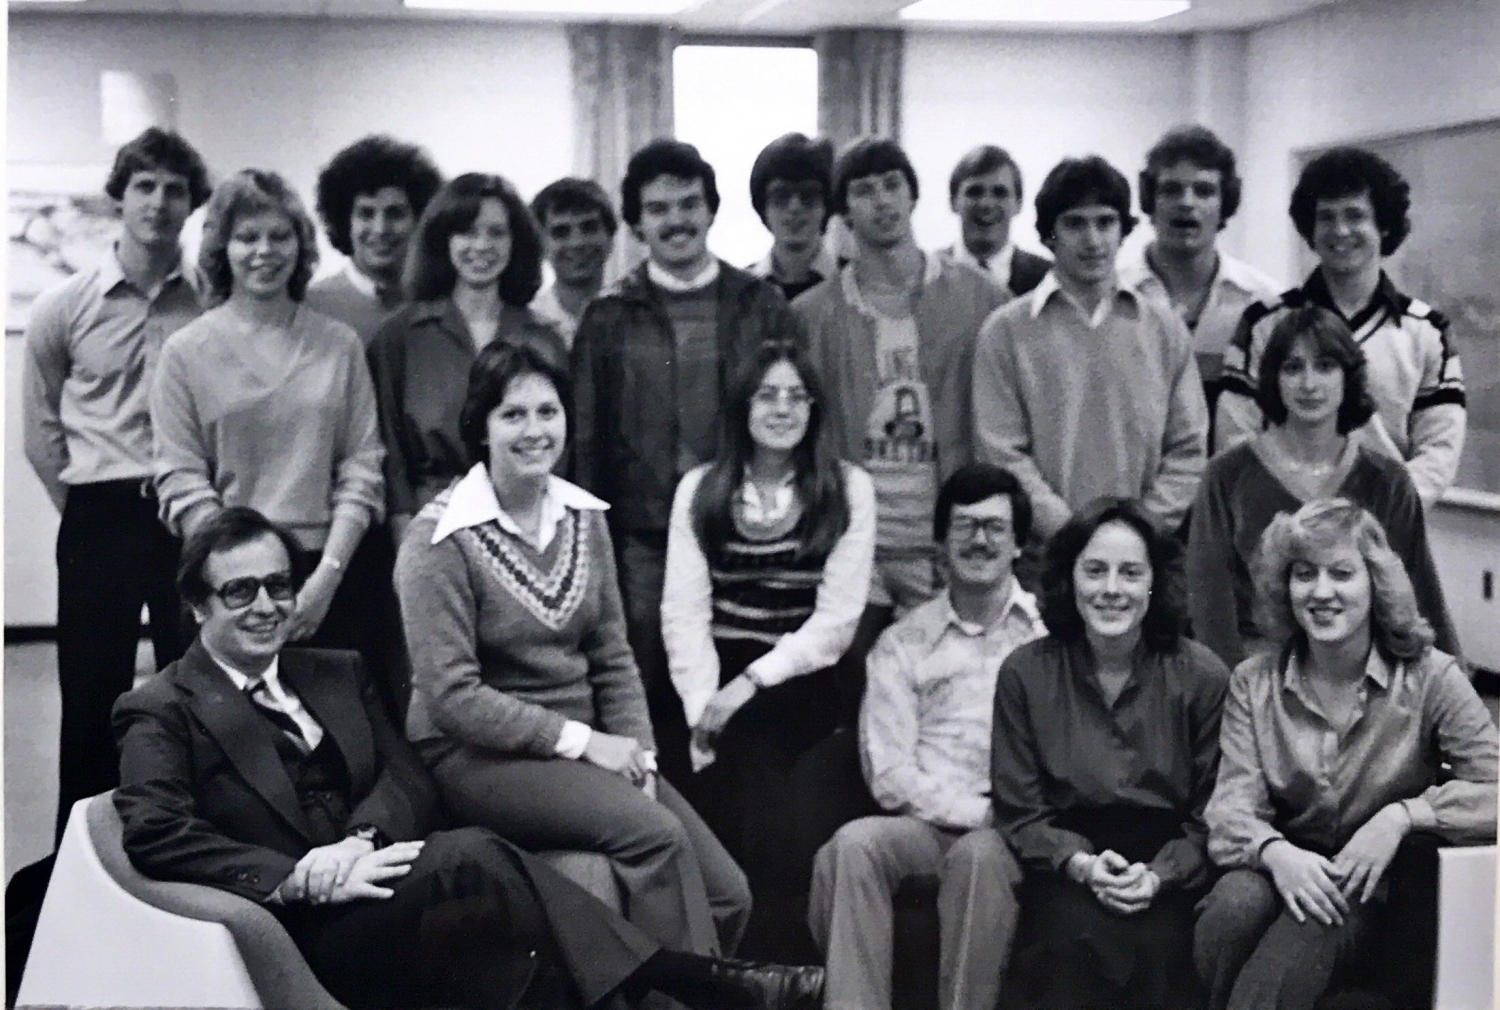 Members of the 1980 Alpha Upsilon chapter with their advisor, Park Leathers